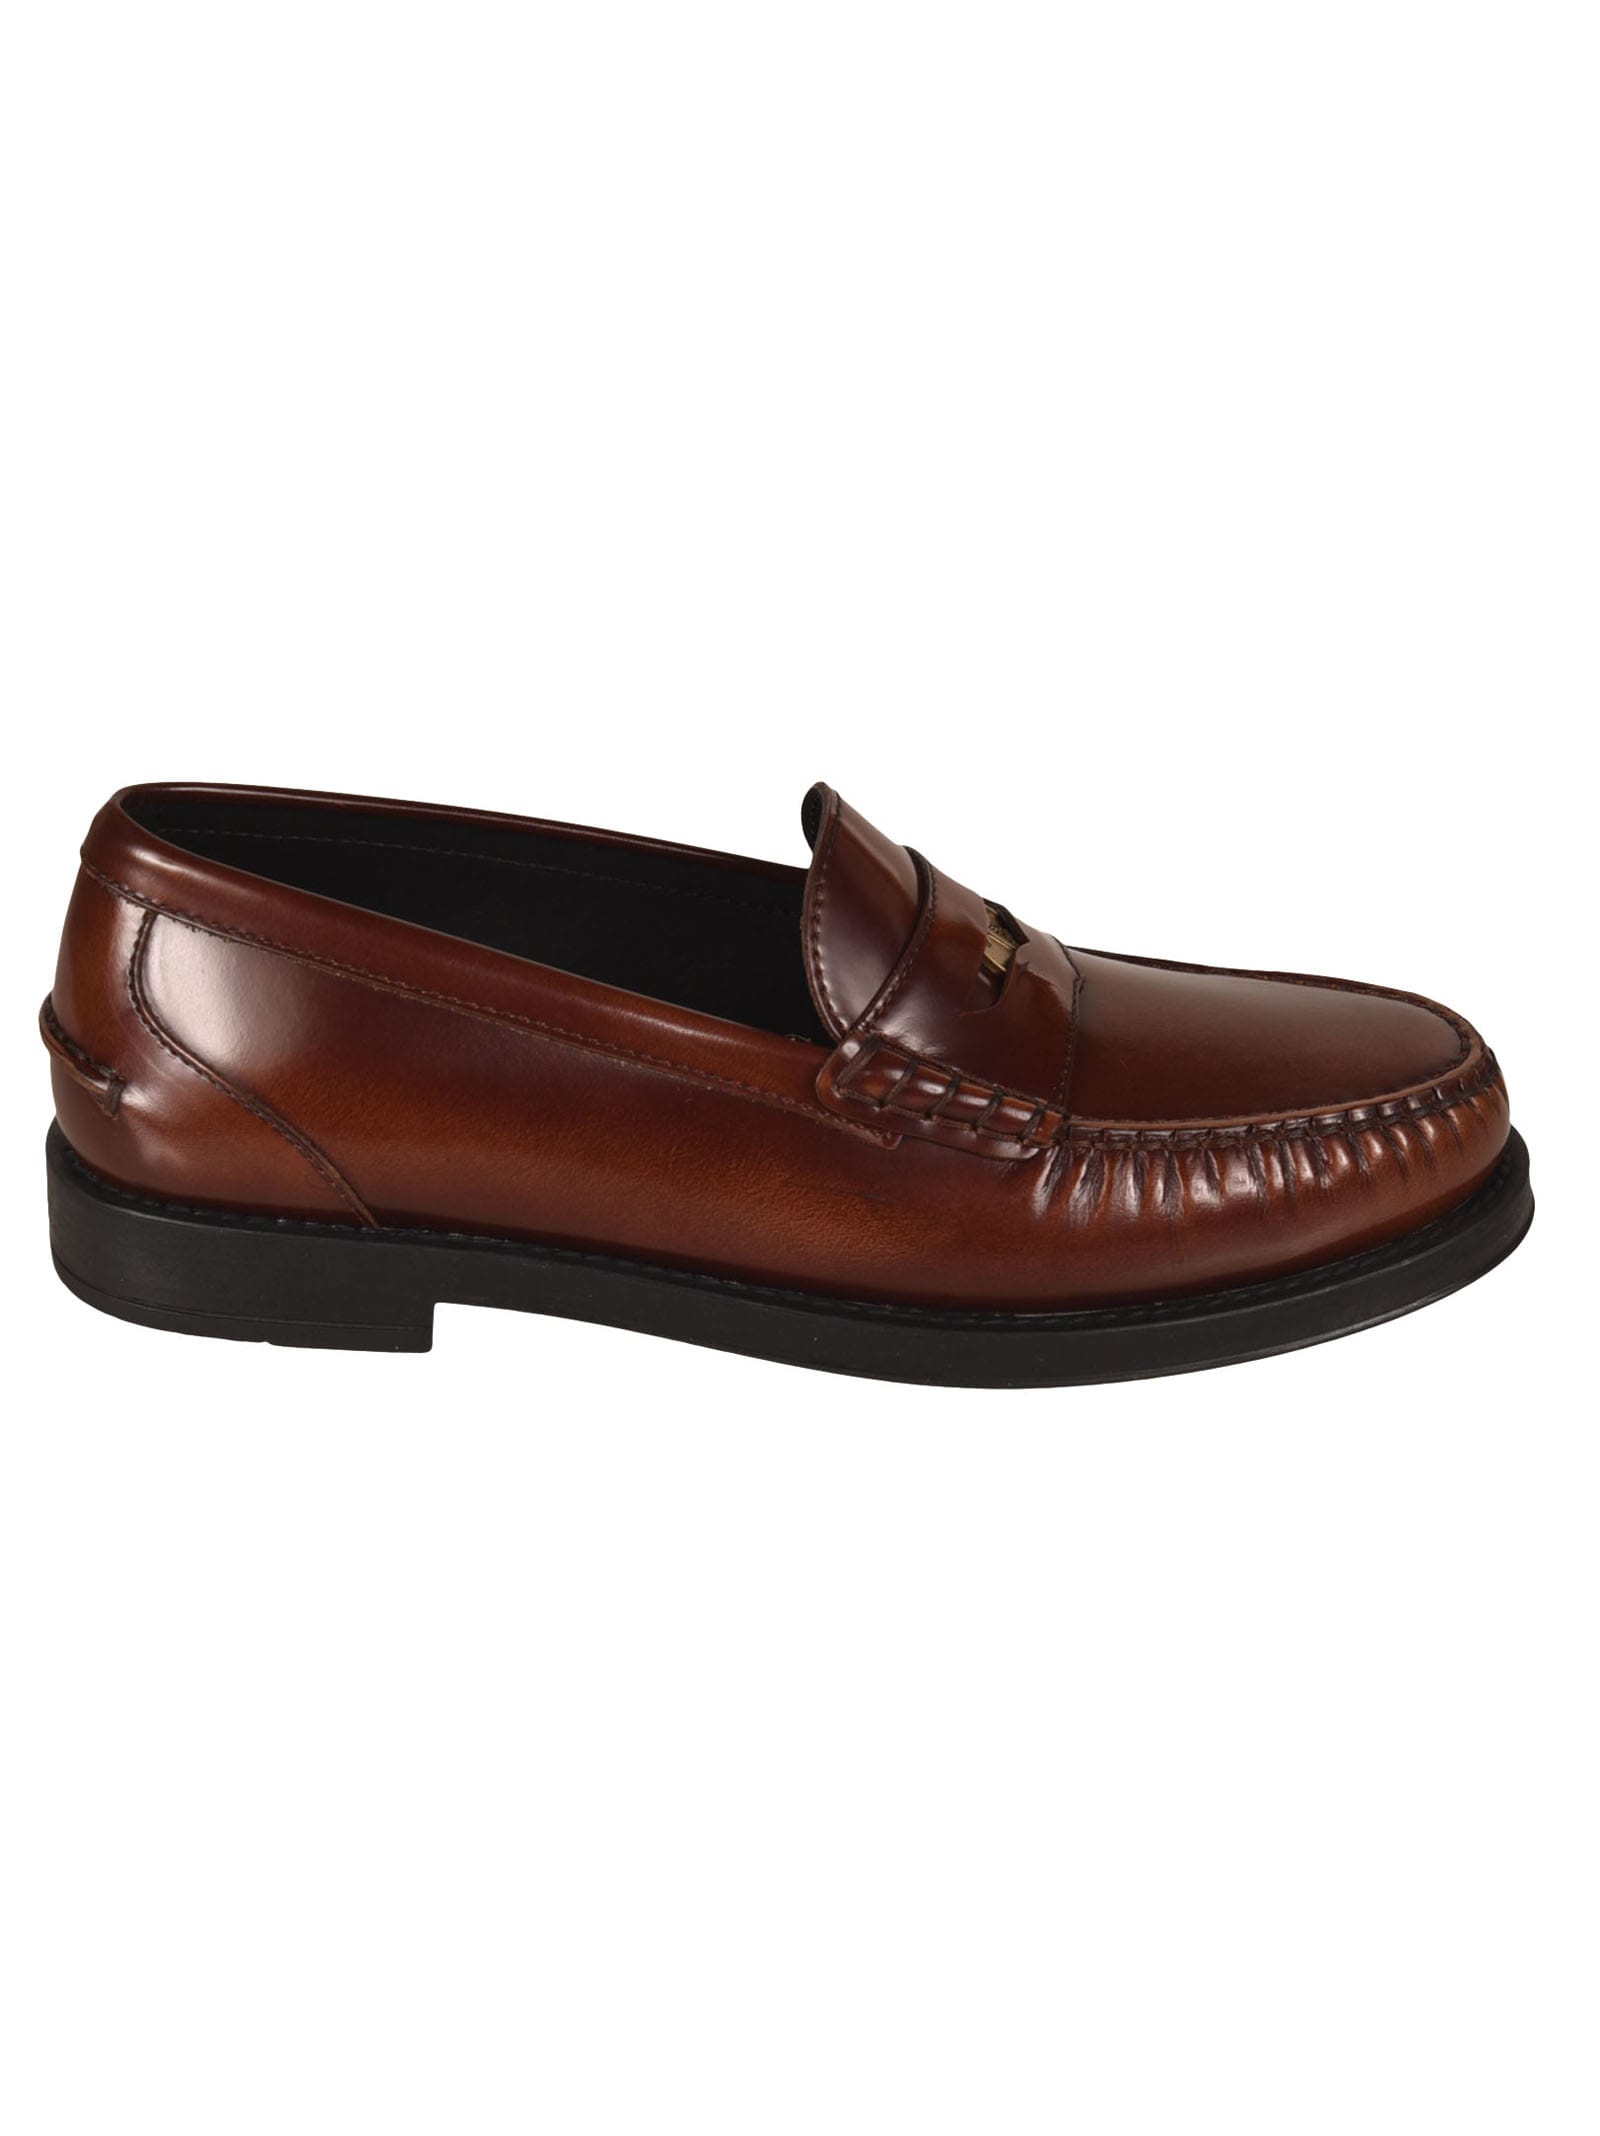 Tods Classic Shiny Loafers